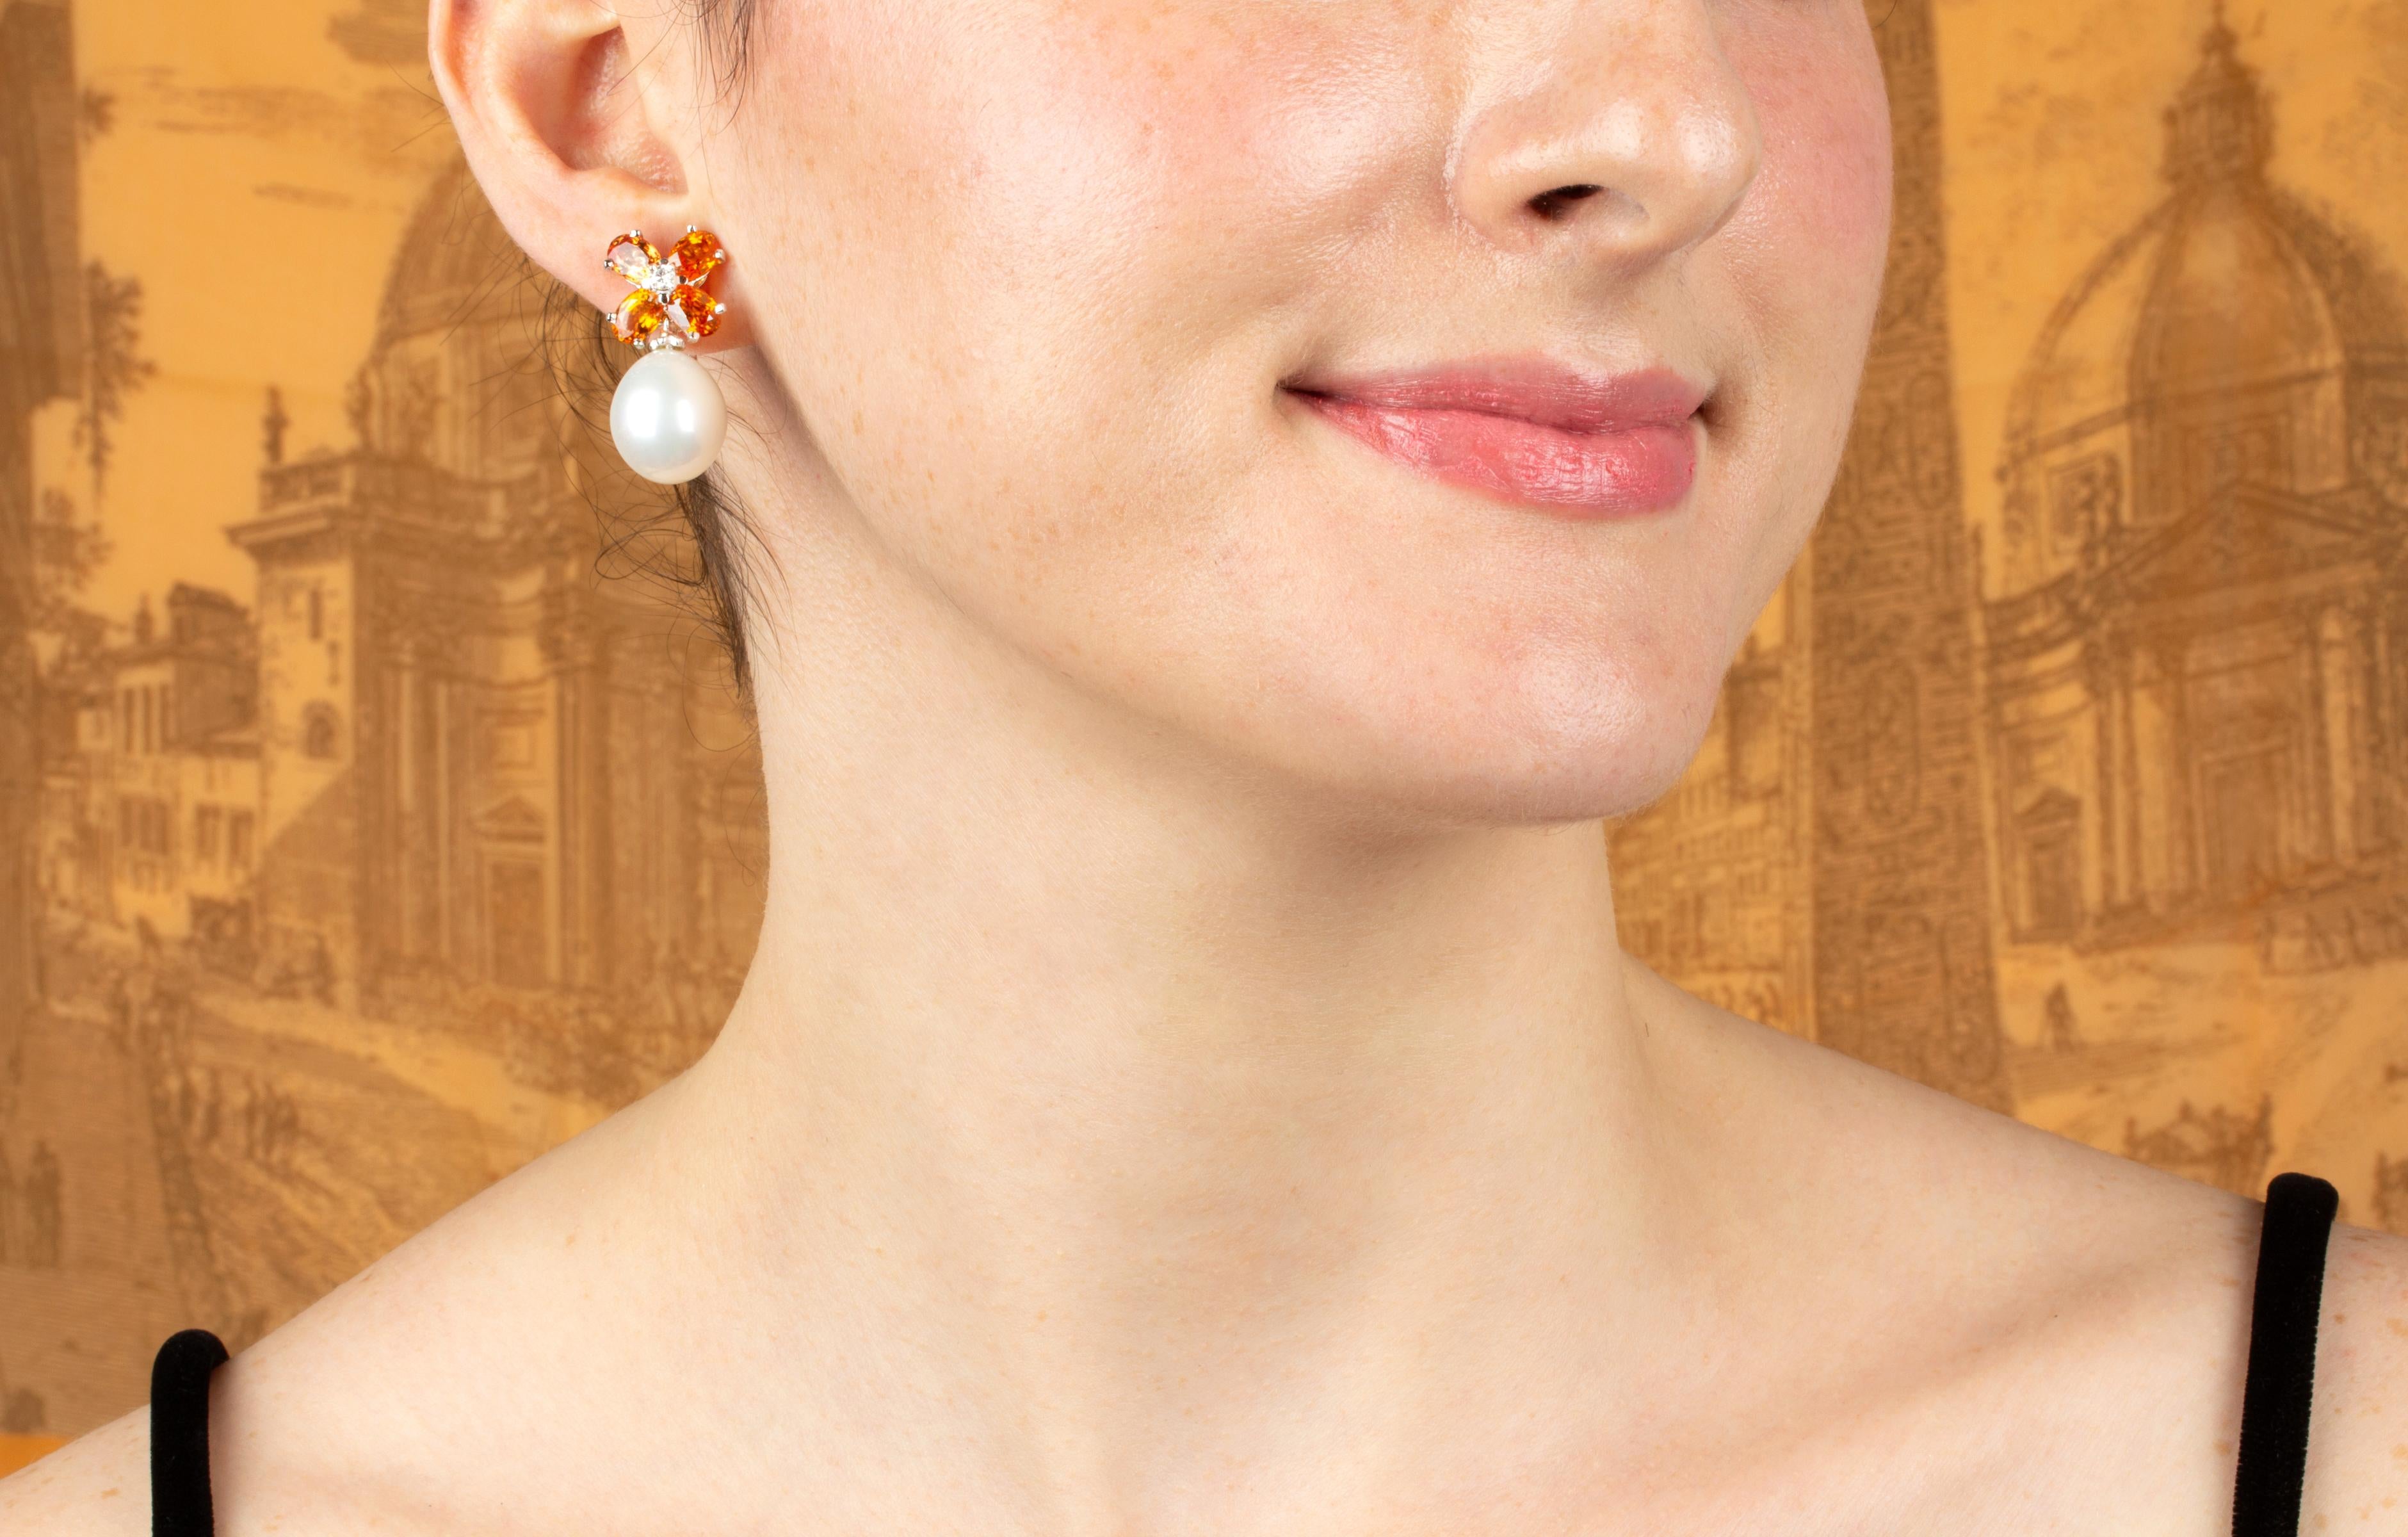 The sapphire and pearl earrings feature a flower design on the ear with 7 carats of oval cut faceted orange sapphires. The tops suspend 2 South Sea pearls of 15mm diameter. 0.12 carats of round diamonds complete the design.
All of our pearls are